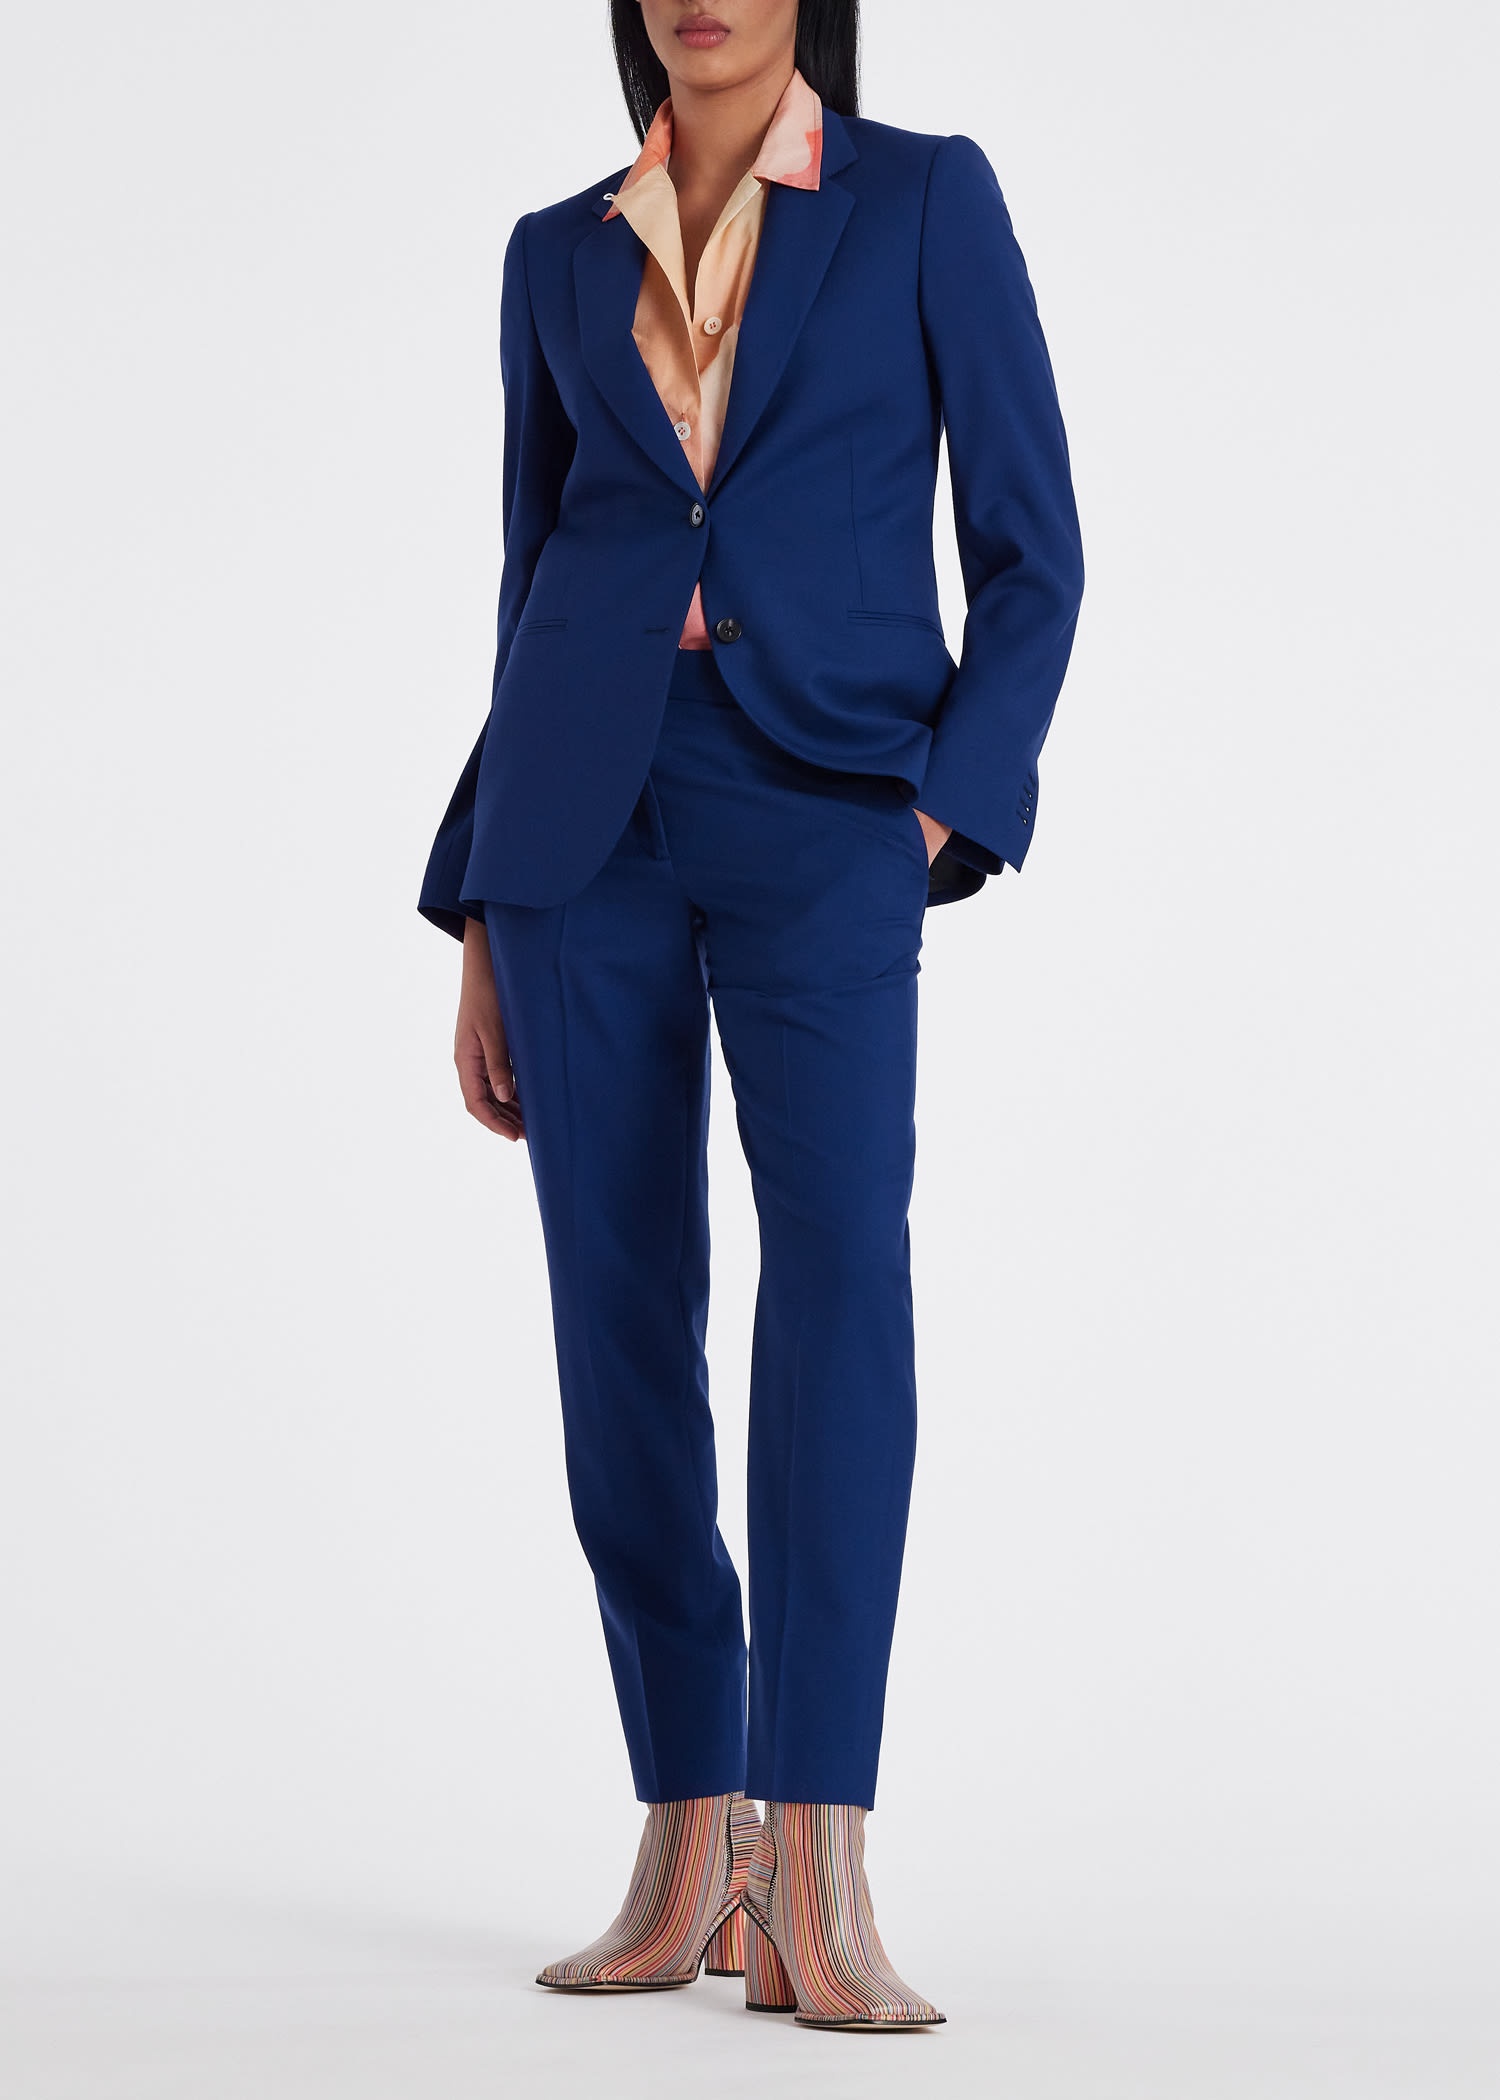 A Suit To Travel In - Women's Wool Suit - 10